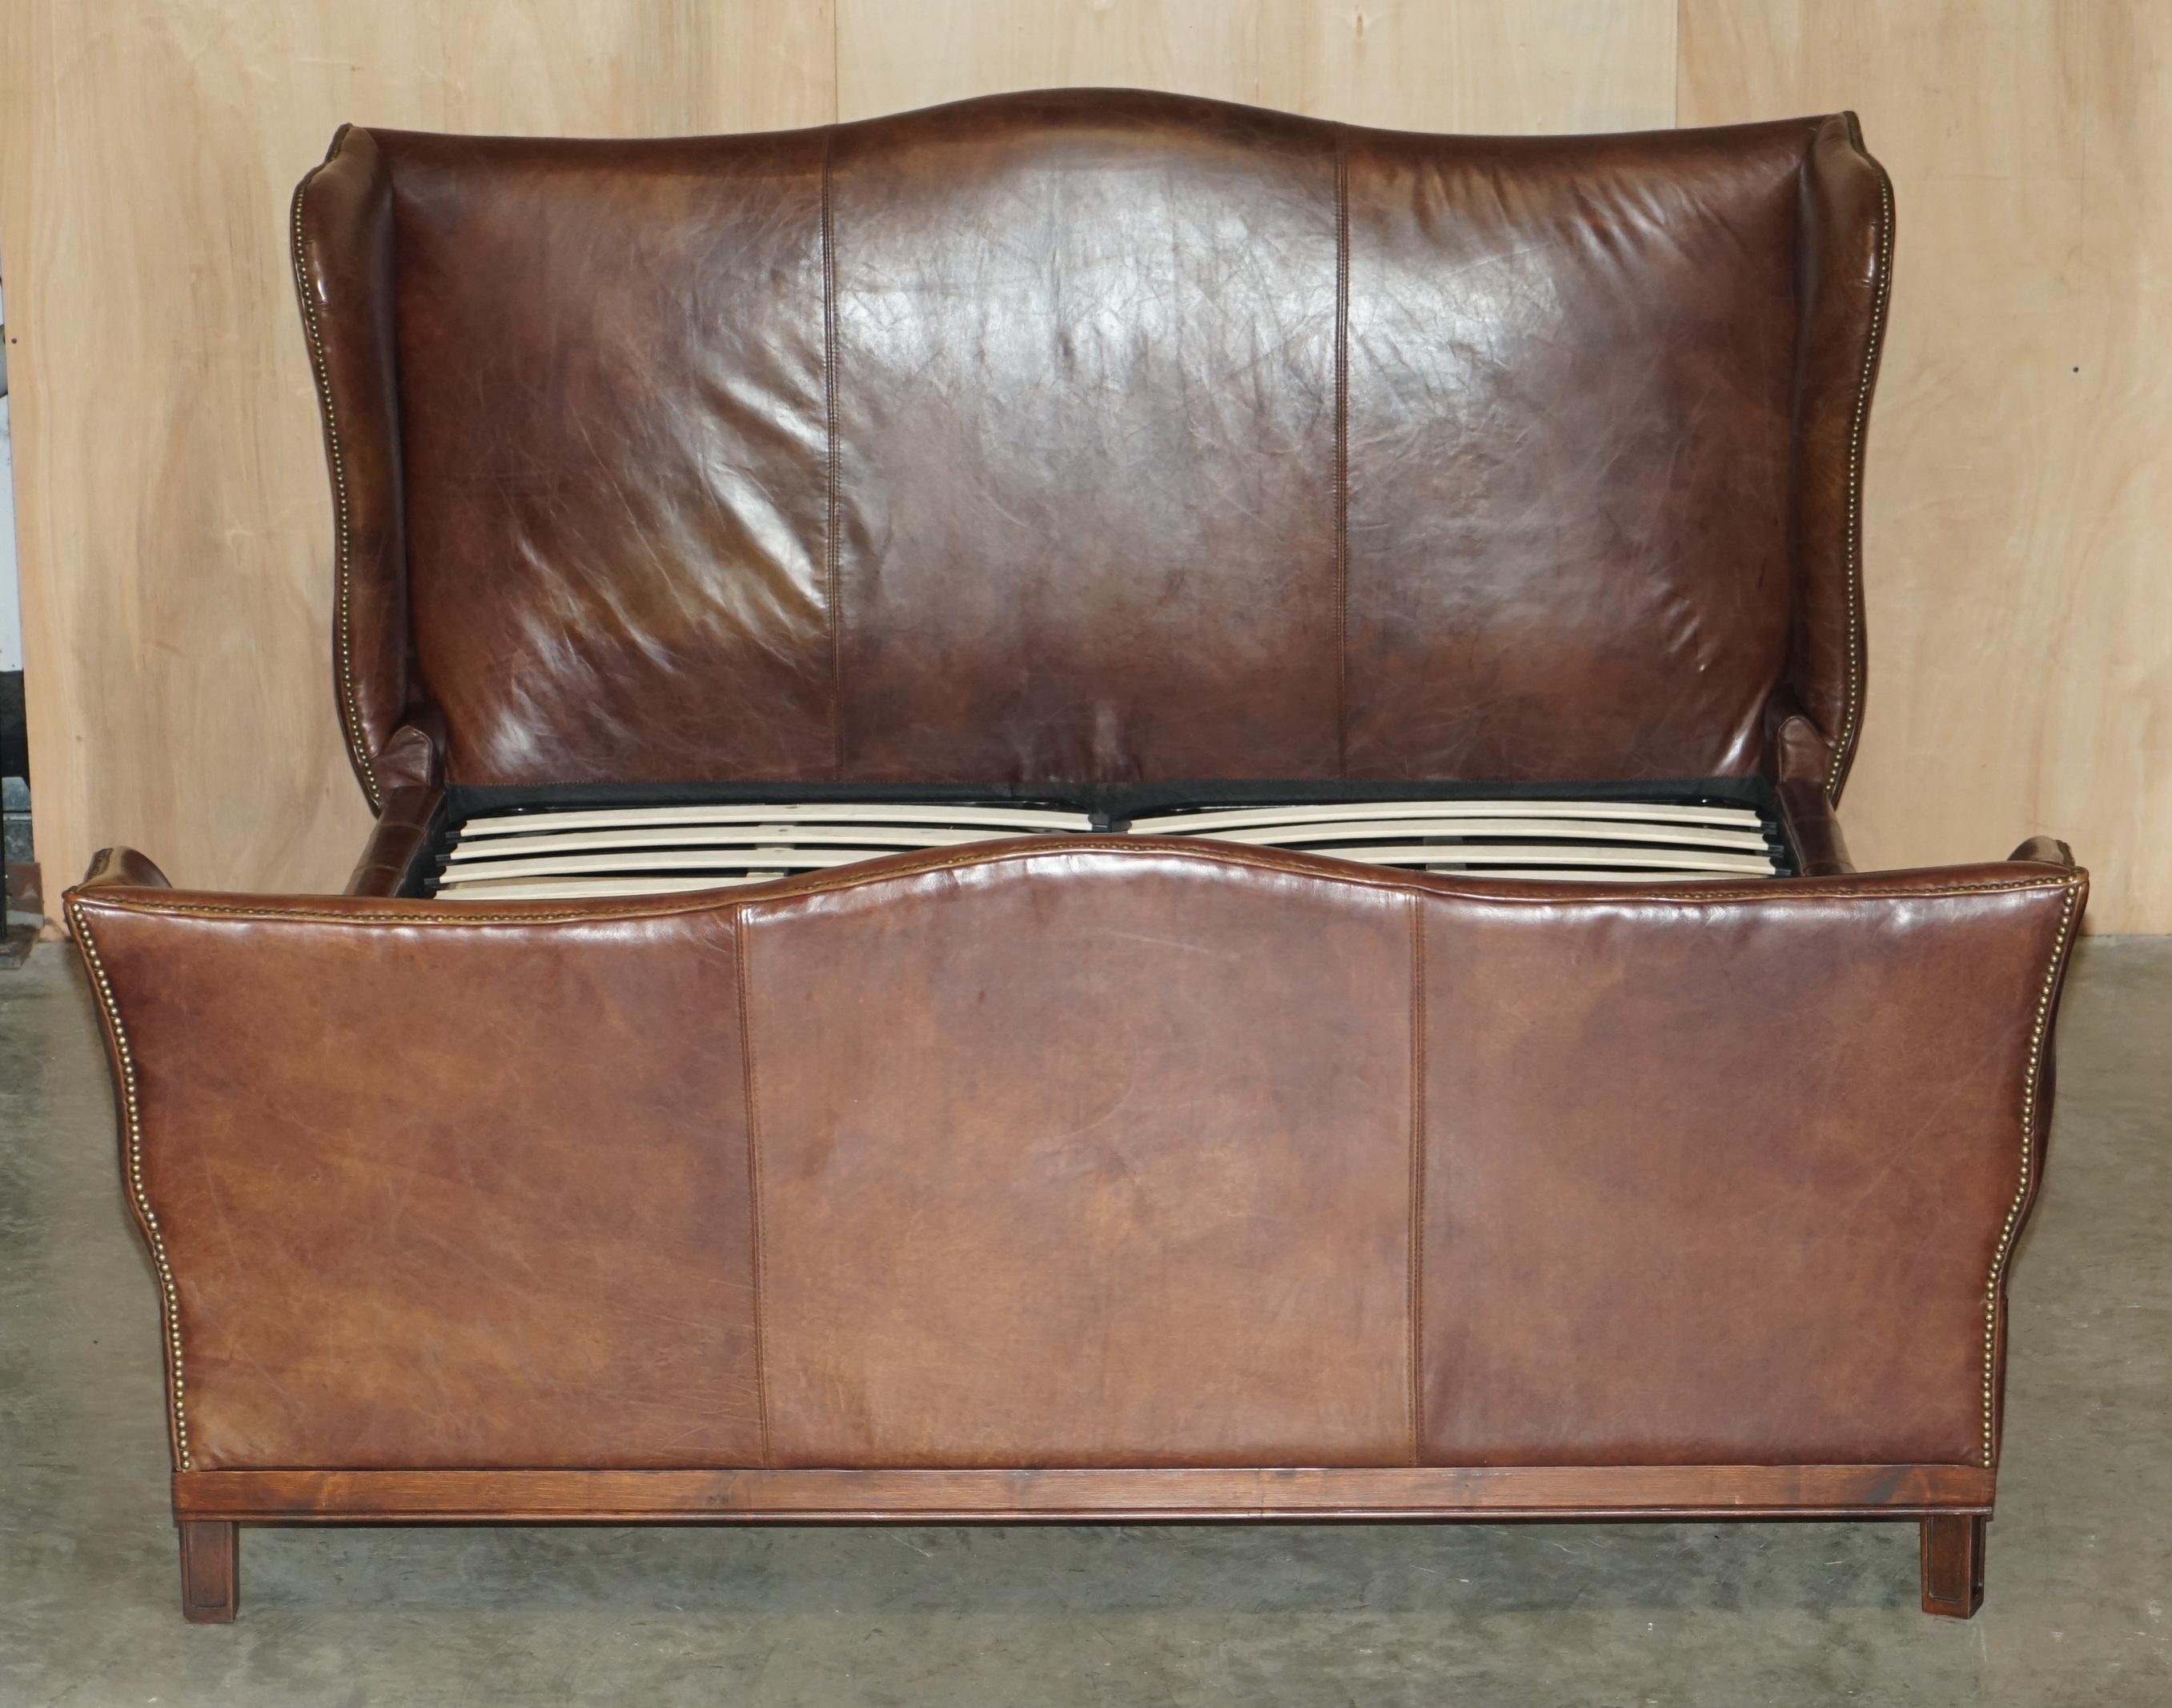 Royal House Antiques

Royal House Antiques is delighted to offer for sale this lovely, very rare hand dyed heritage brown leather wingback super king size bed frame

Please note the delivery fee listed is just a guide, it covers within the M25 only